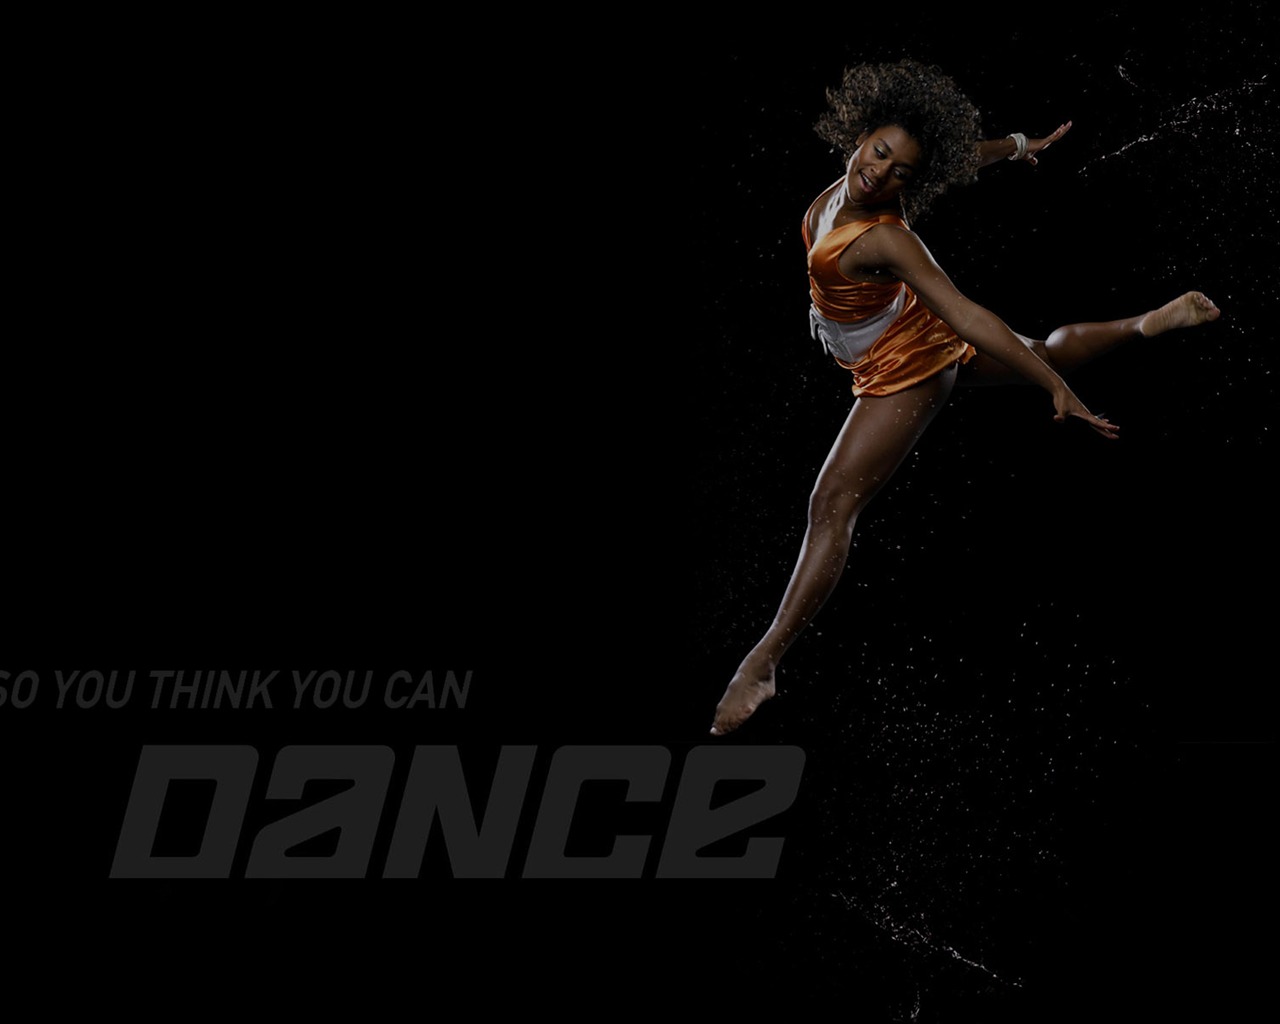 So You Think You Can Dance 舞林争霸 壁纸(二)7 - 1280x1024